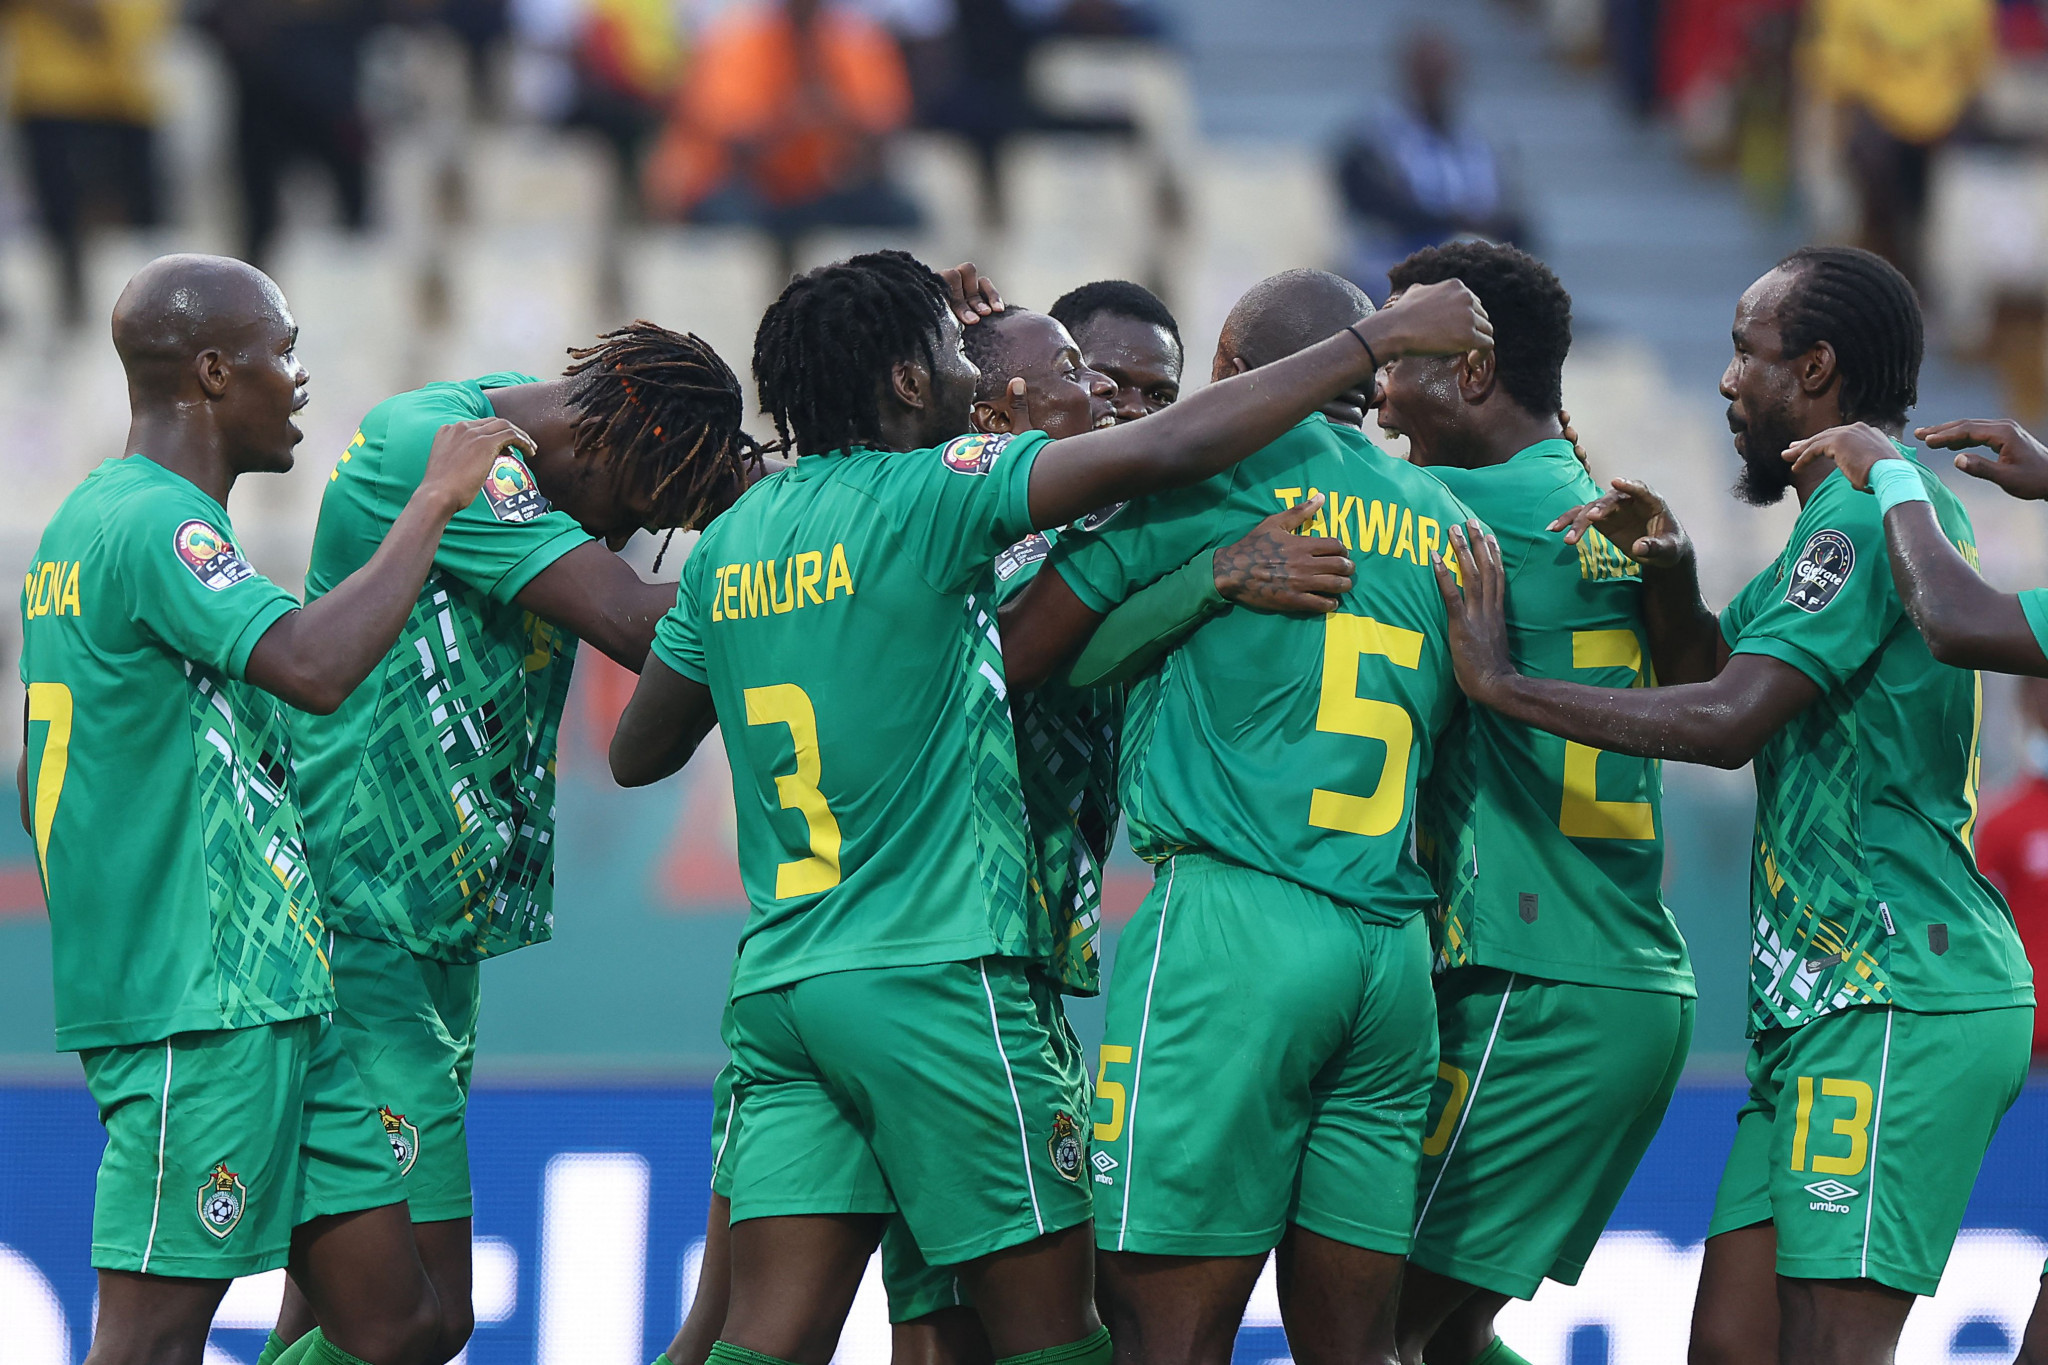 Preview+South+Africa+vs+Zimbabwe%3A+FIFA+World+Cup+qualifying+match